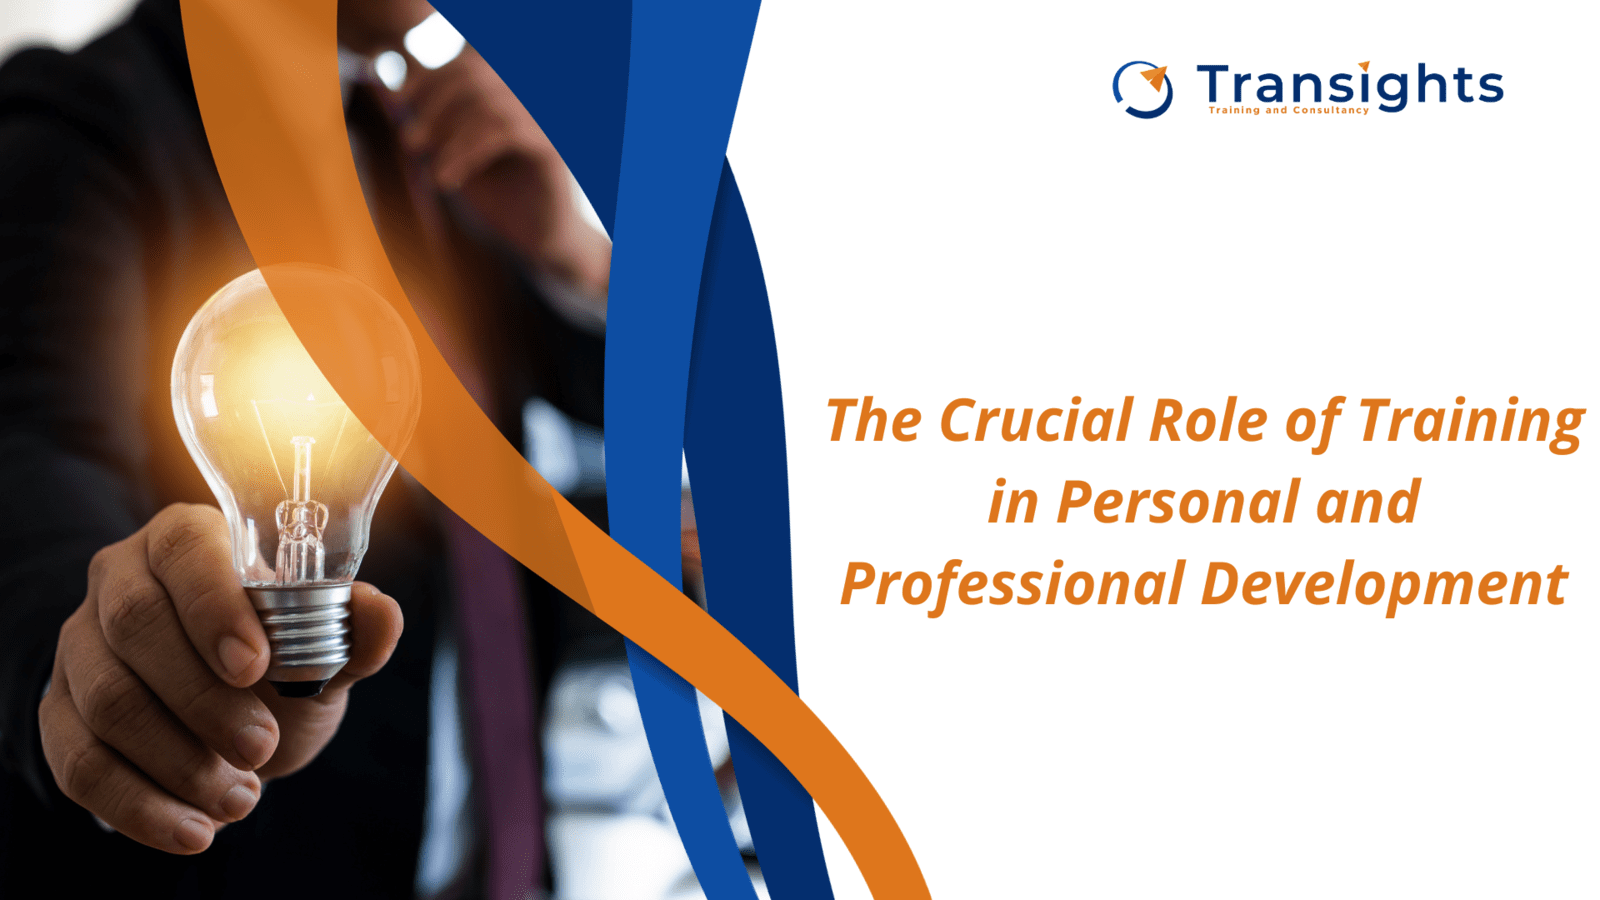 The Crucial Role of Training in Personal and Professional Development